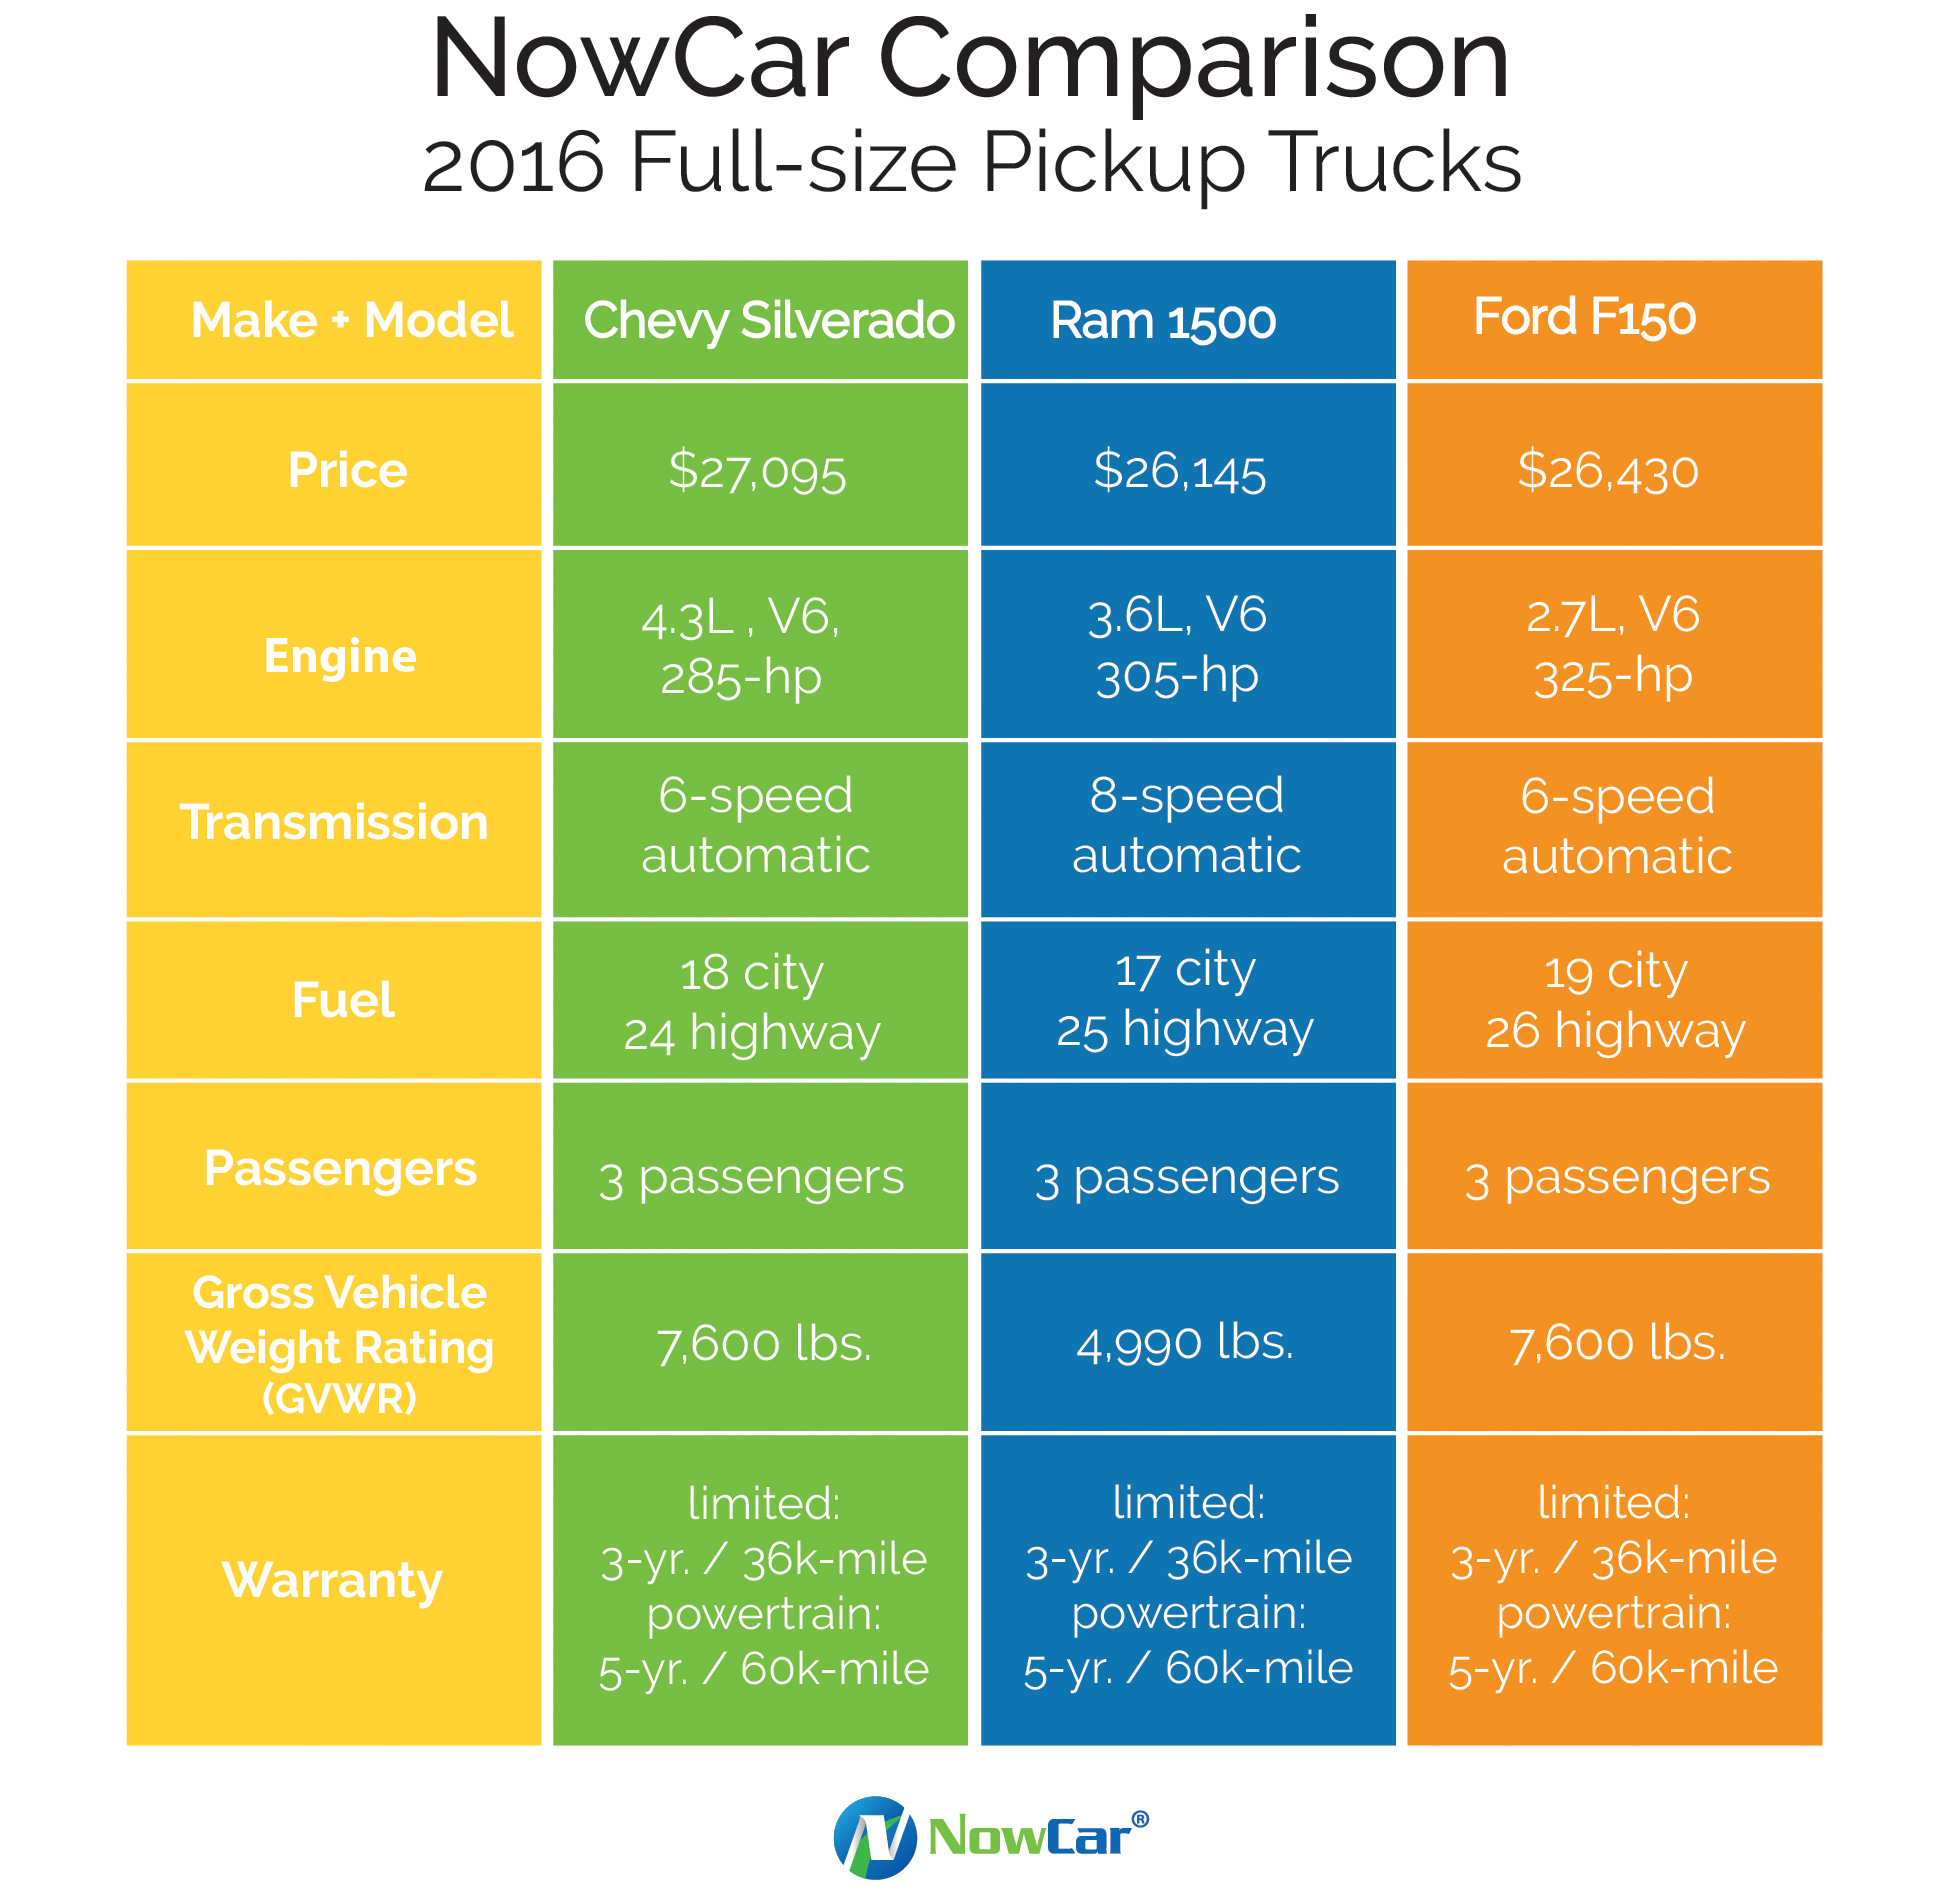 Truck comparison: Ford, Ram, Chevy